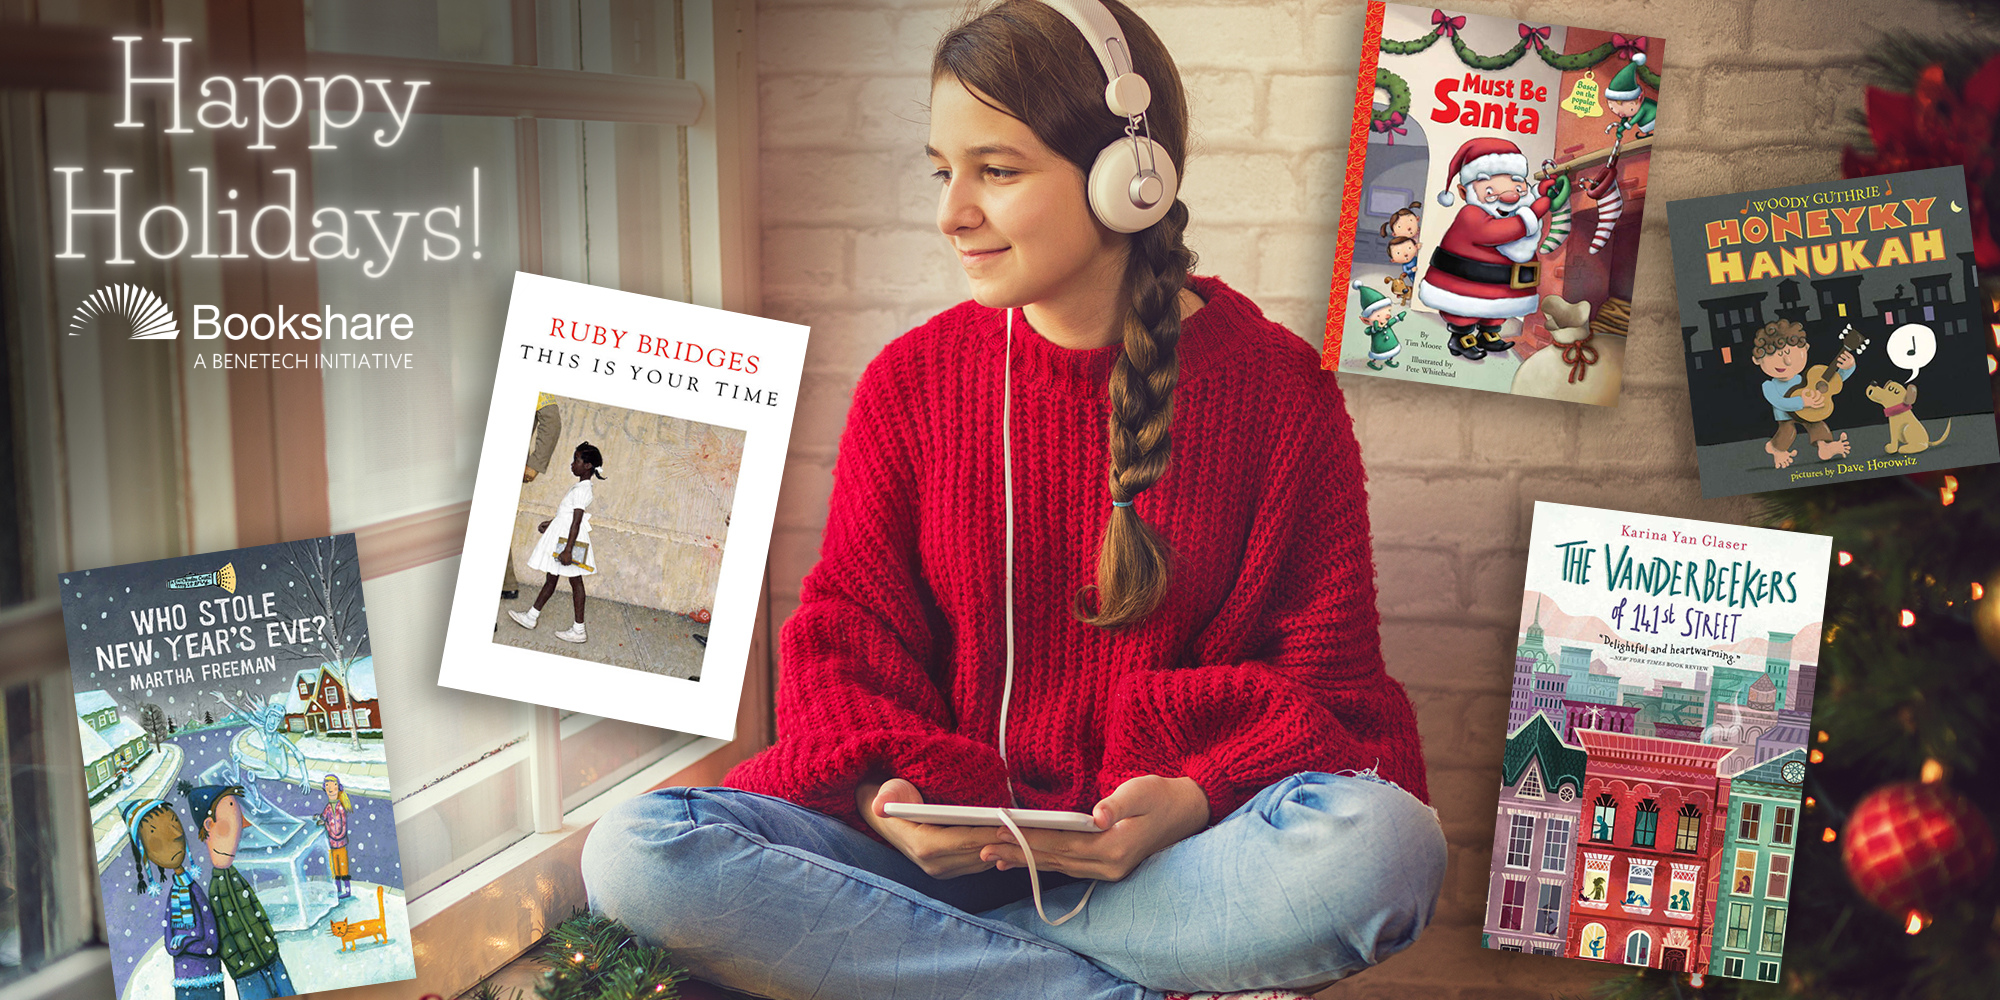 Girl is listening to an audiobook surrounded by five holiday books and Happy Holidays from Bookshare on the left